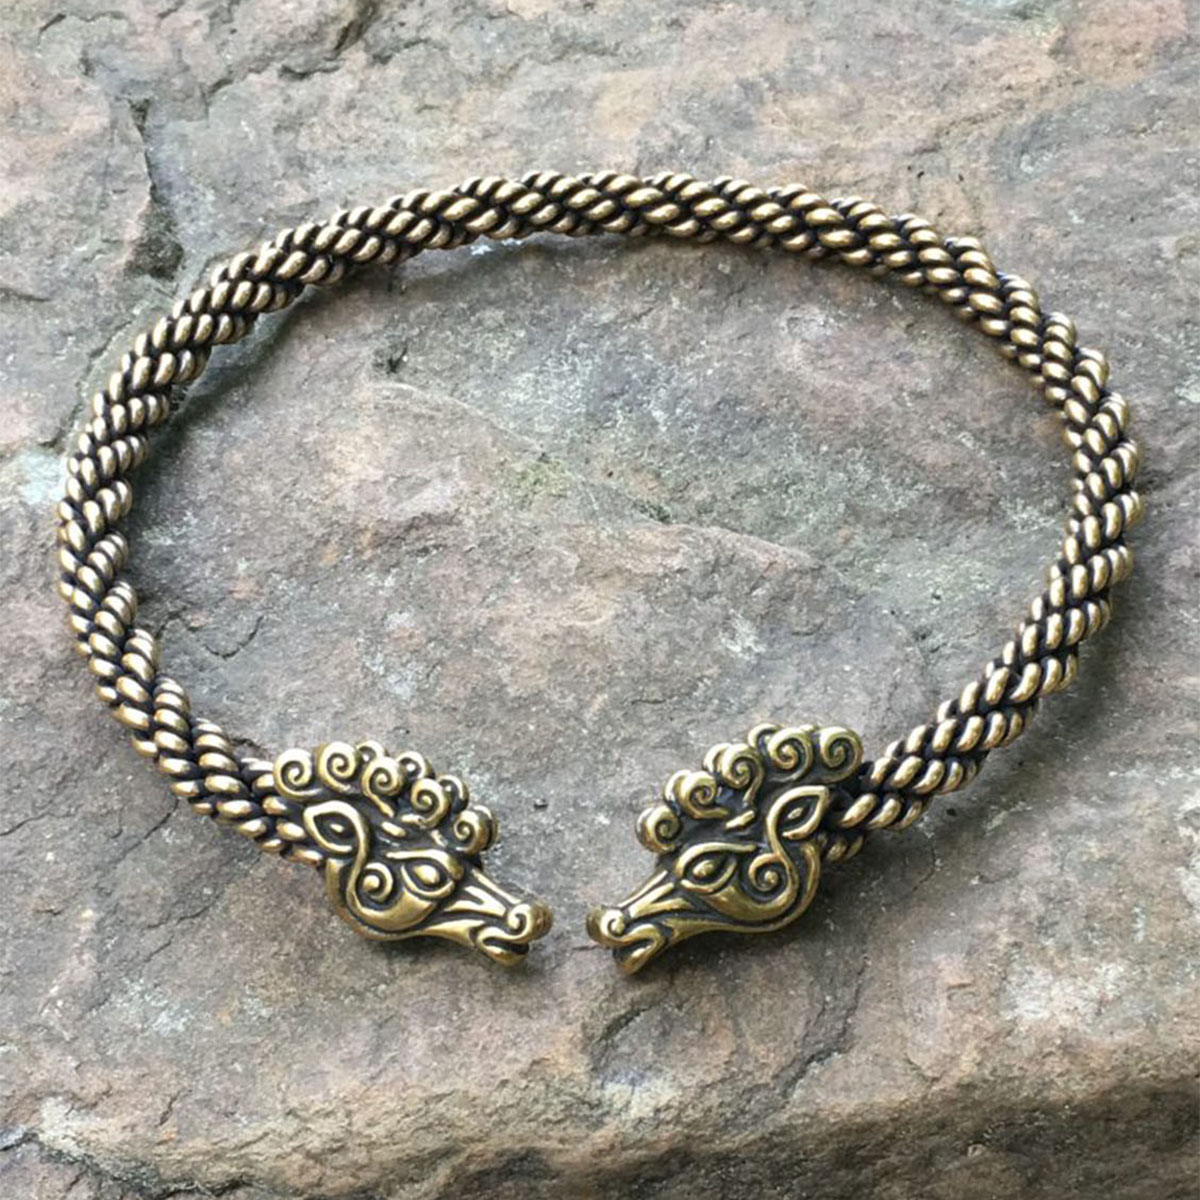 Two Celtic Stag Neck Torc bracelets on top of a rock.